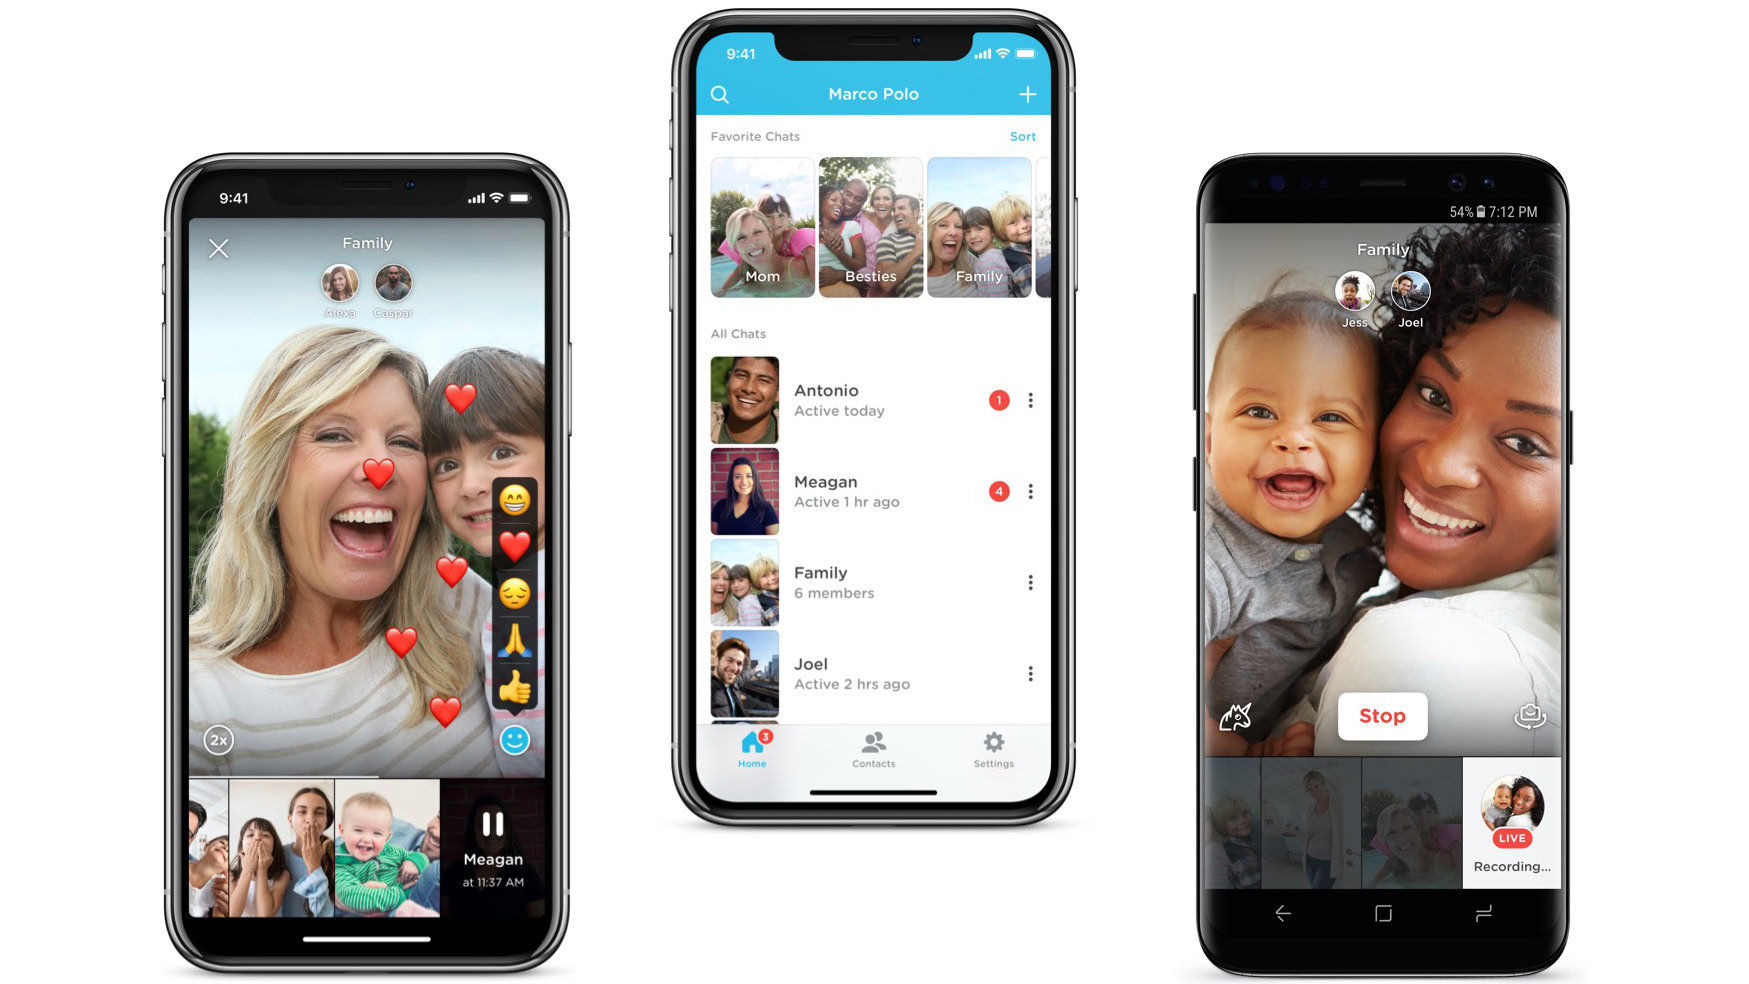 Marco Polo app - Video chat with family and friends